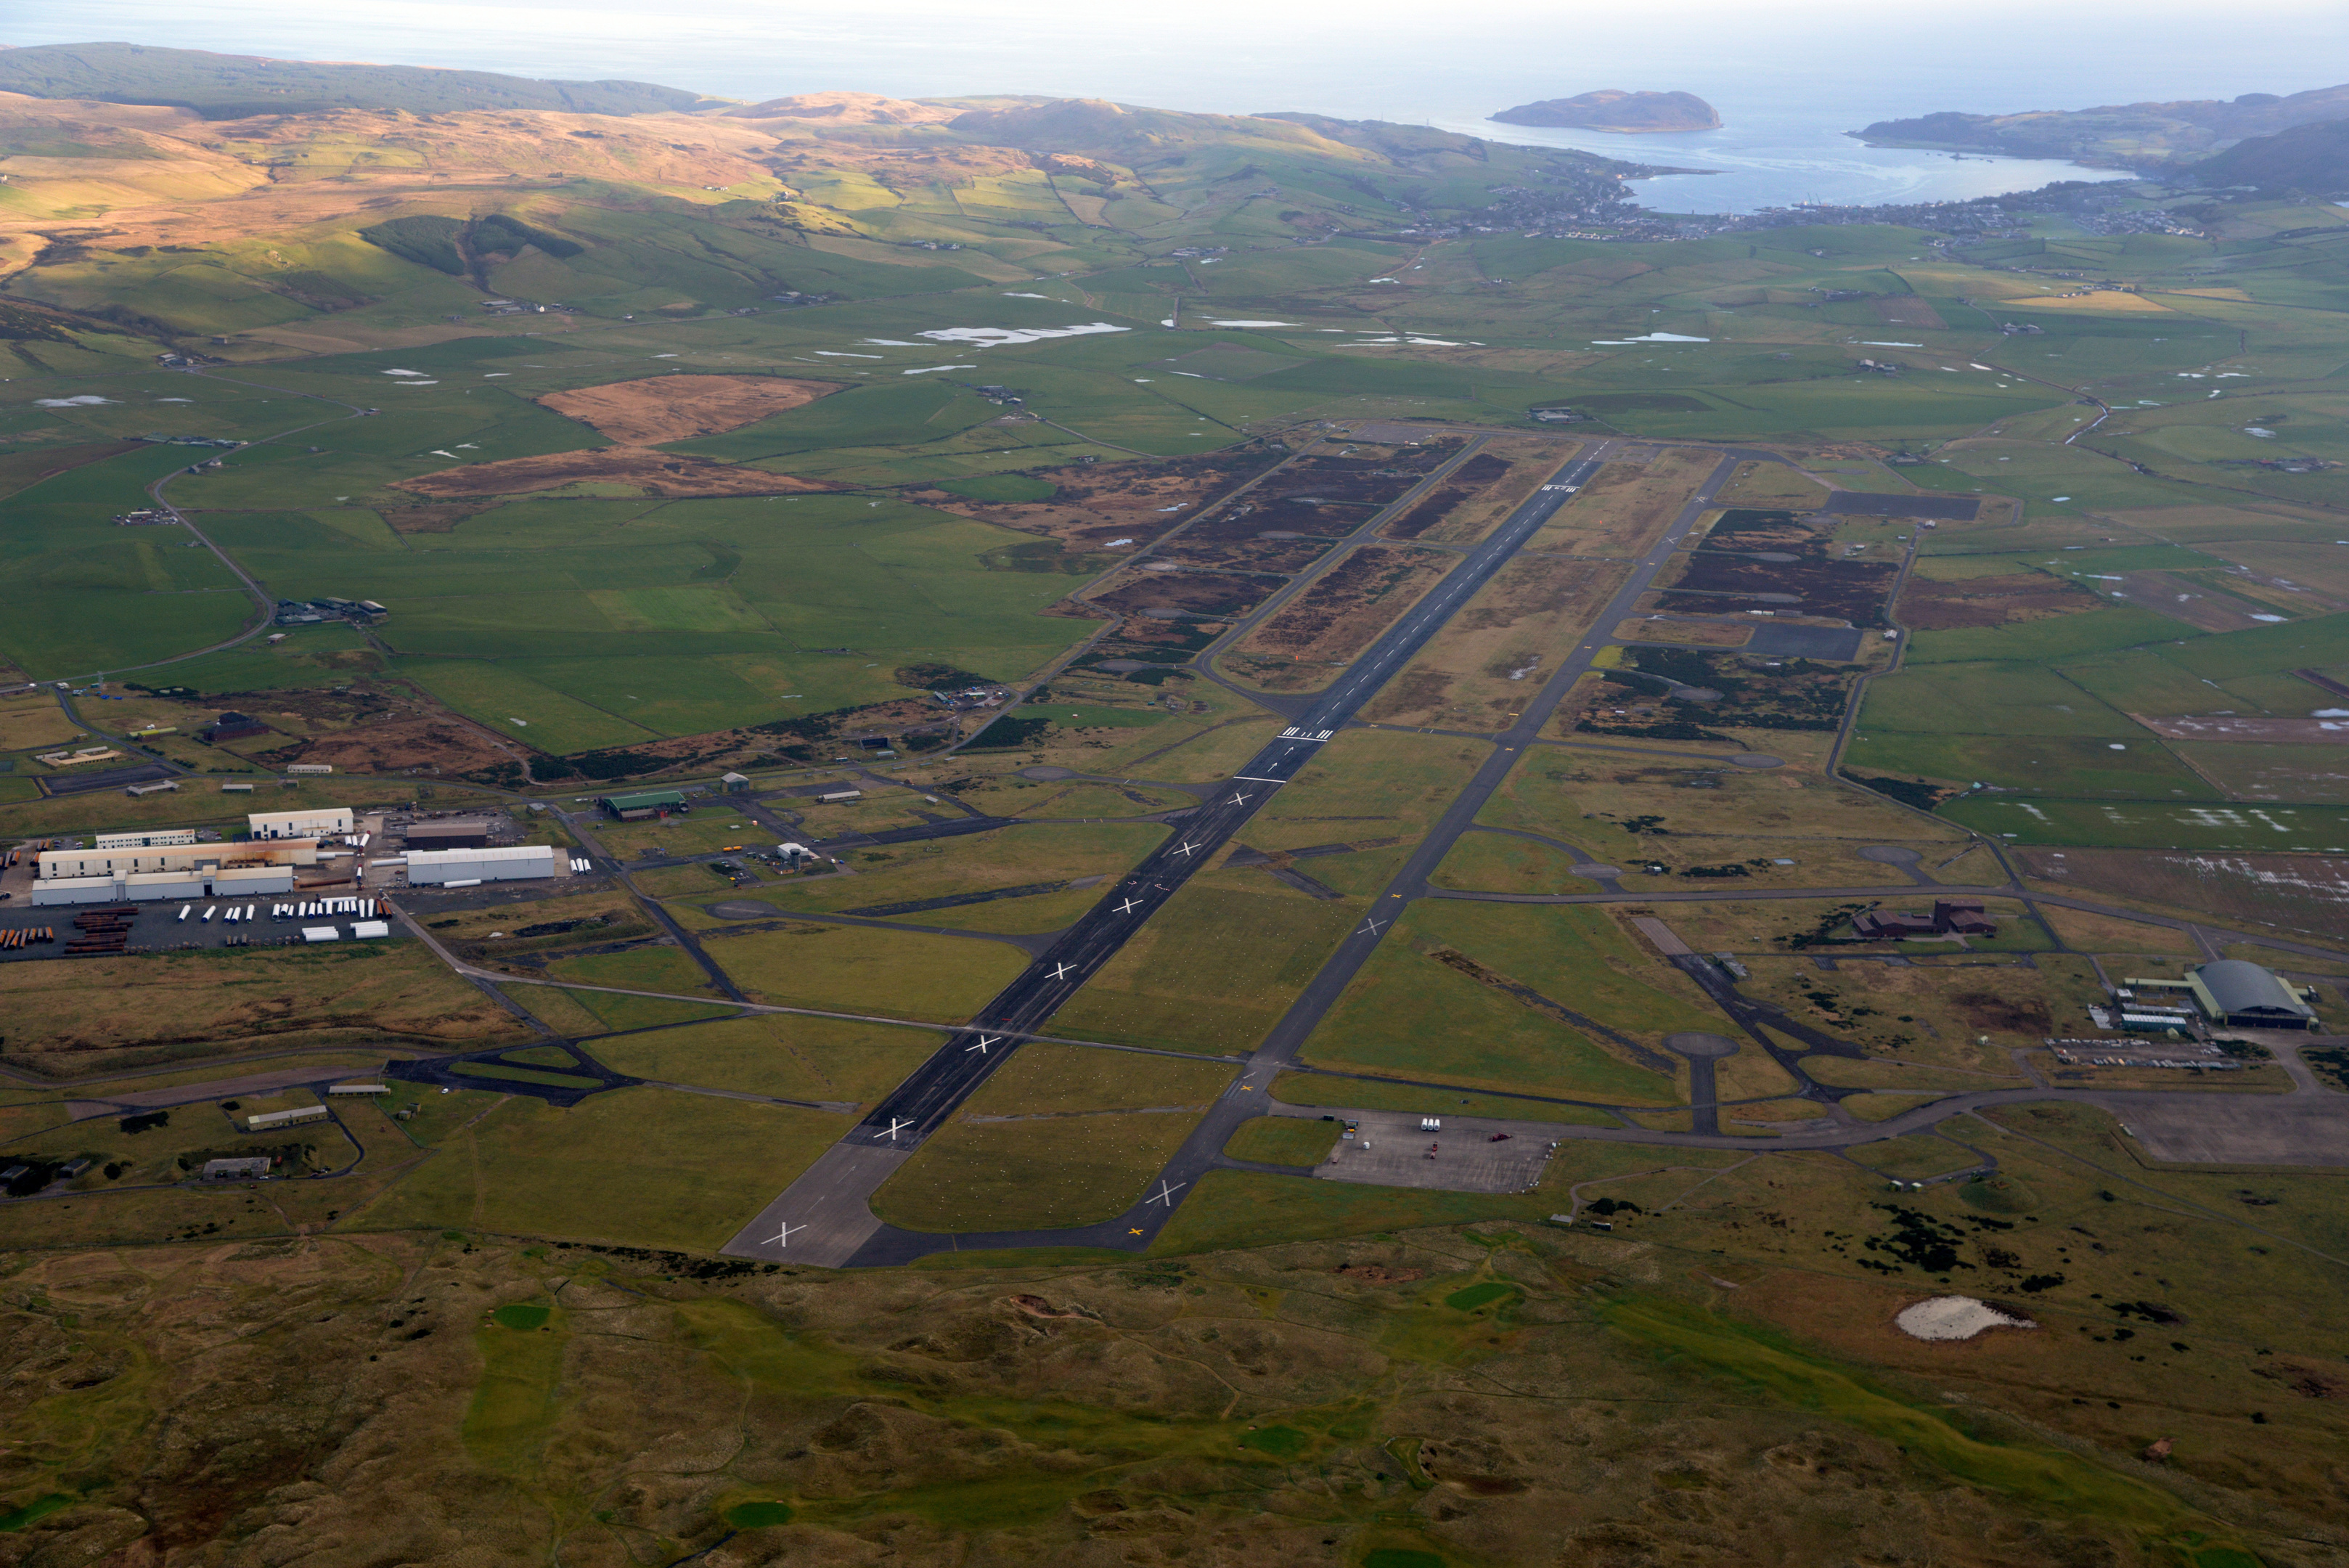 Machrihanish in Argyll could be the UK's first spaceport